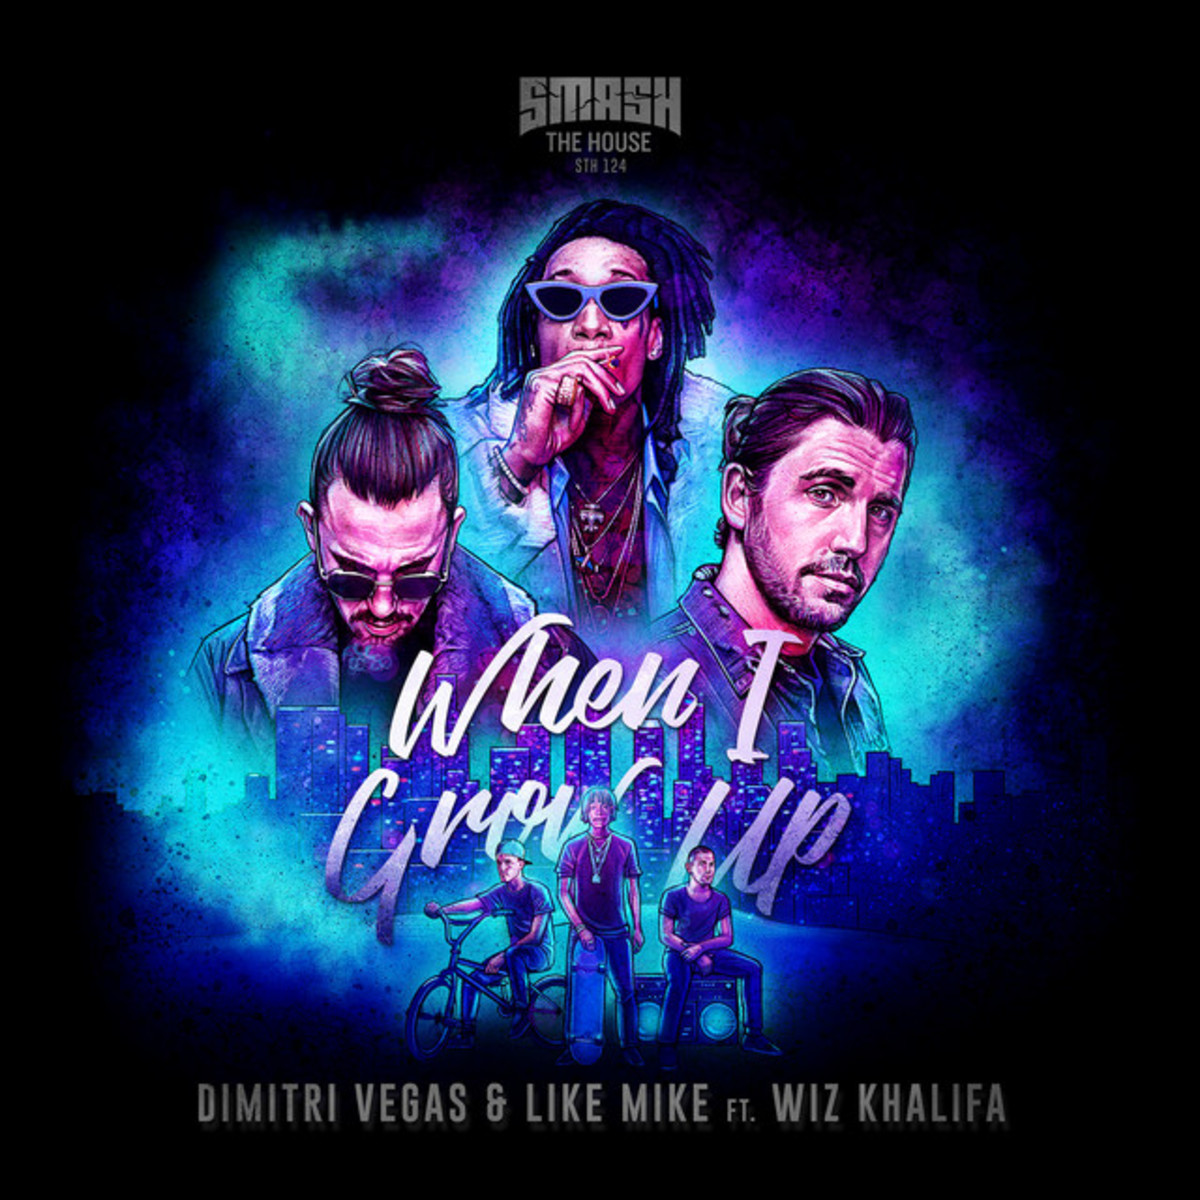 Interview Dimitri Vegas Like Mike Talk About New Single